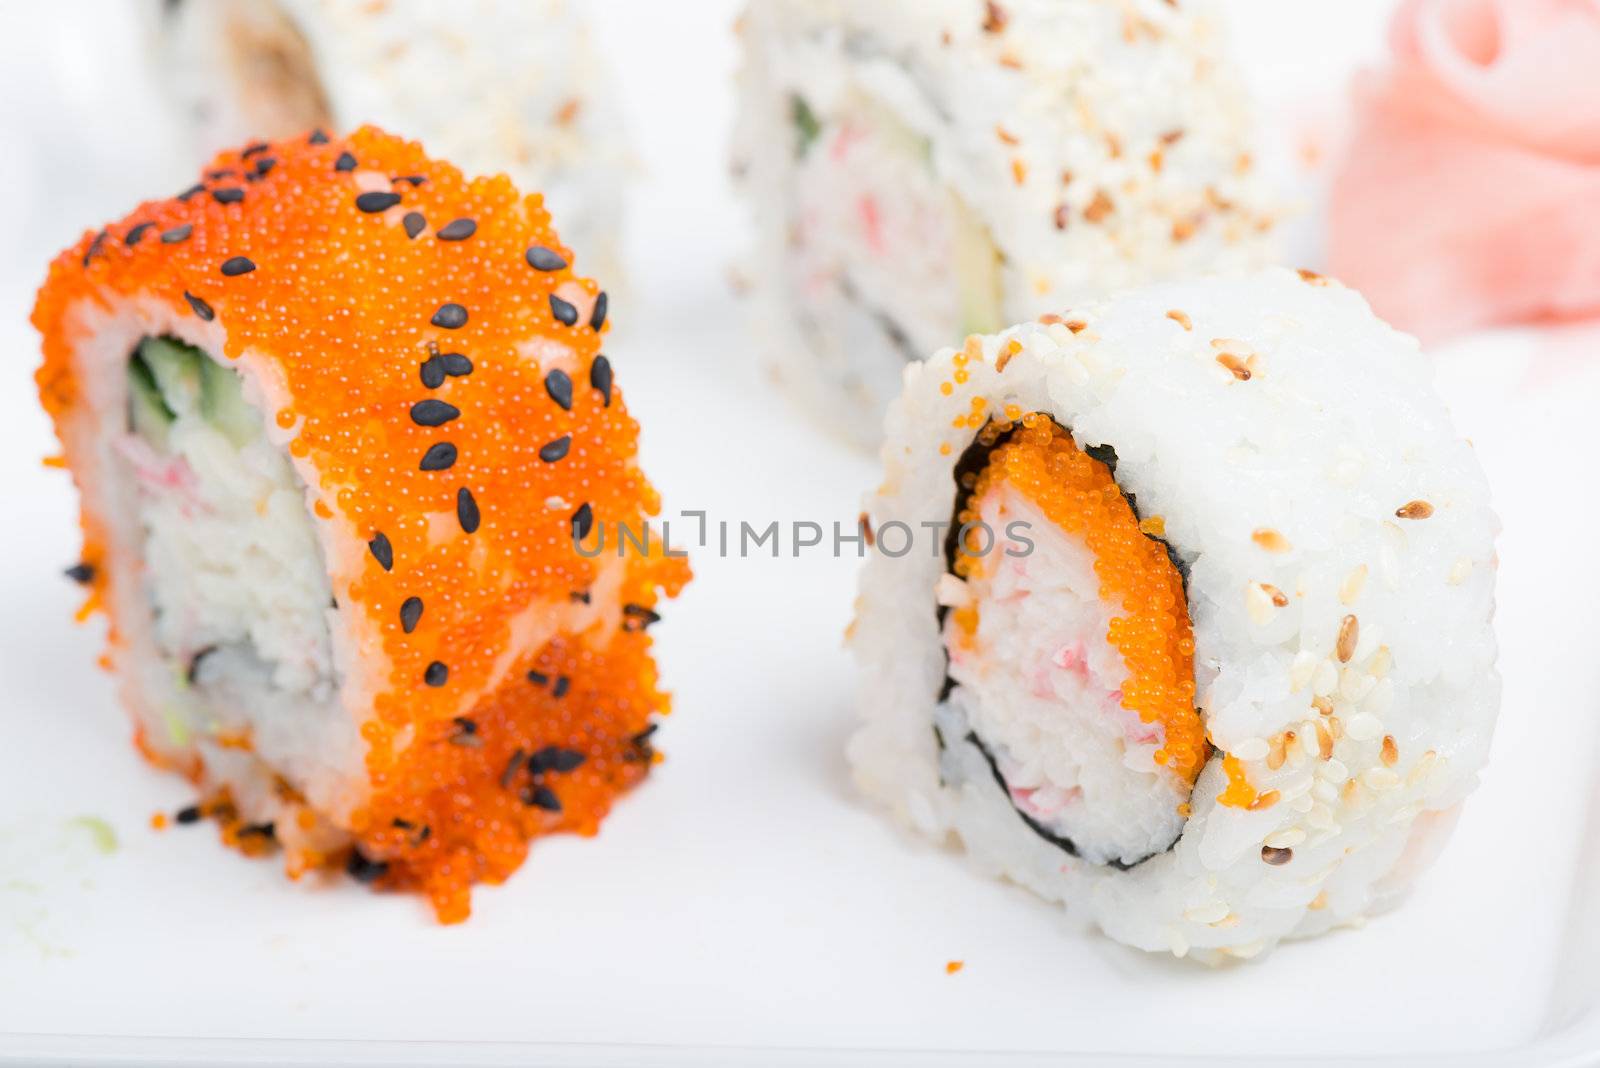 Orange and white shushi rolls. Shallow depth of field. Focus on the white rise